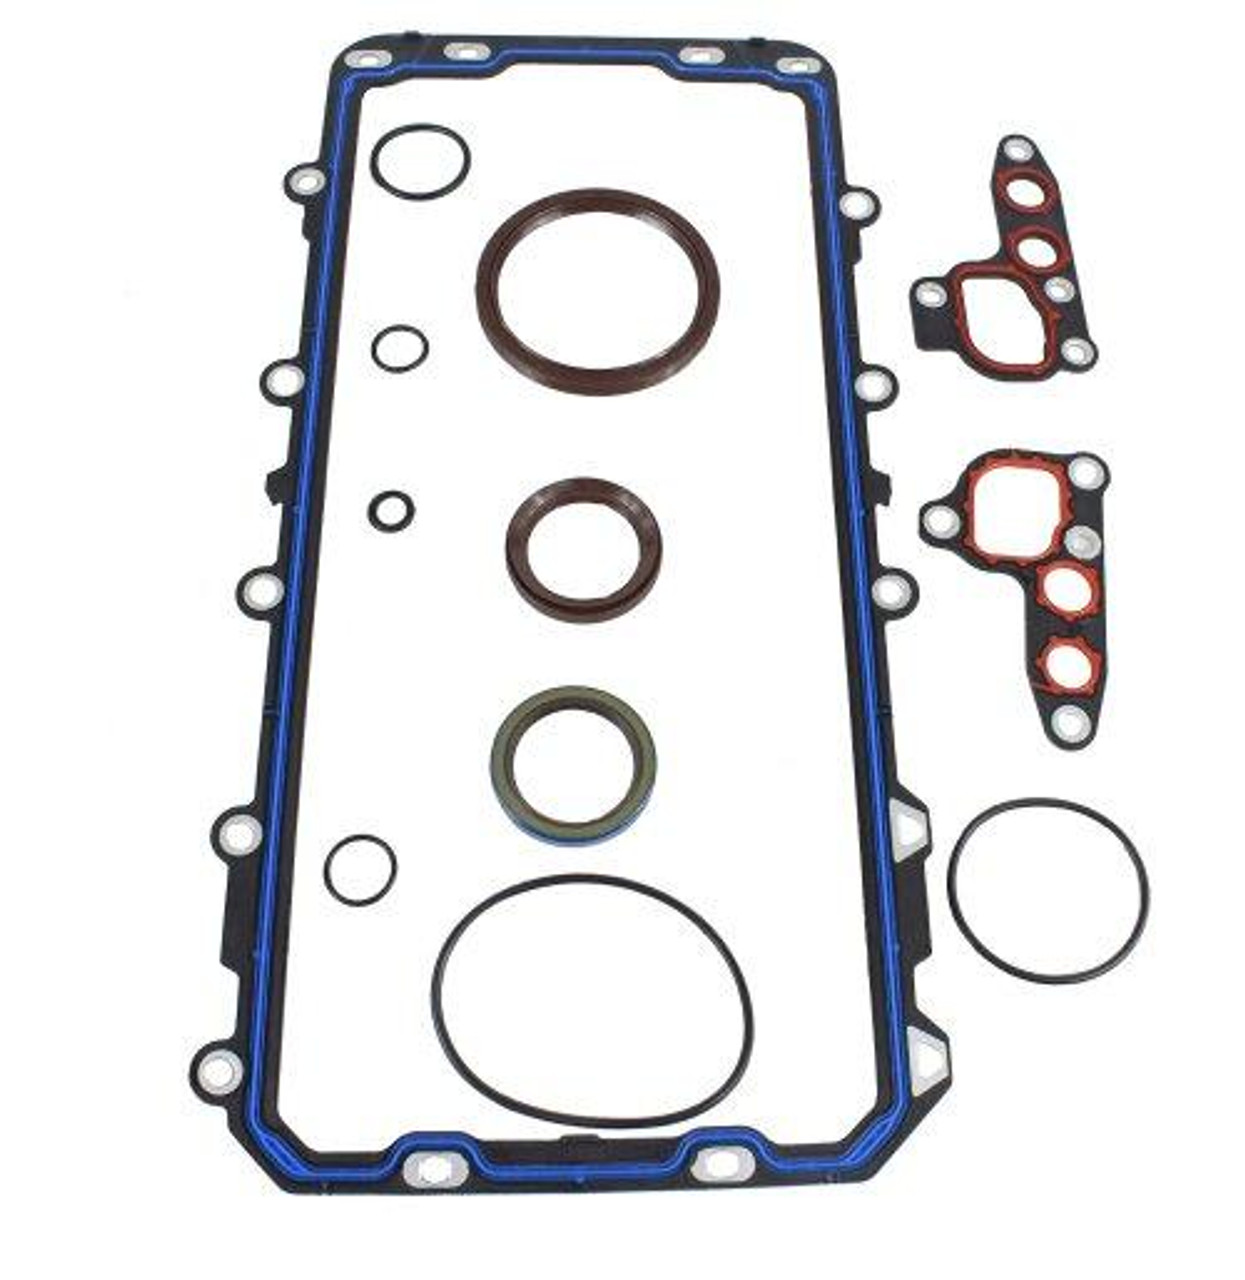 Lower Gasket Set - 1995 Ford Thunderbird 4.6L Engine Parts # LGS4150ZE281